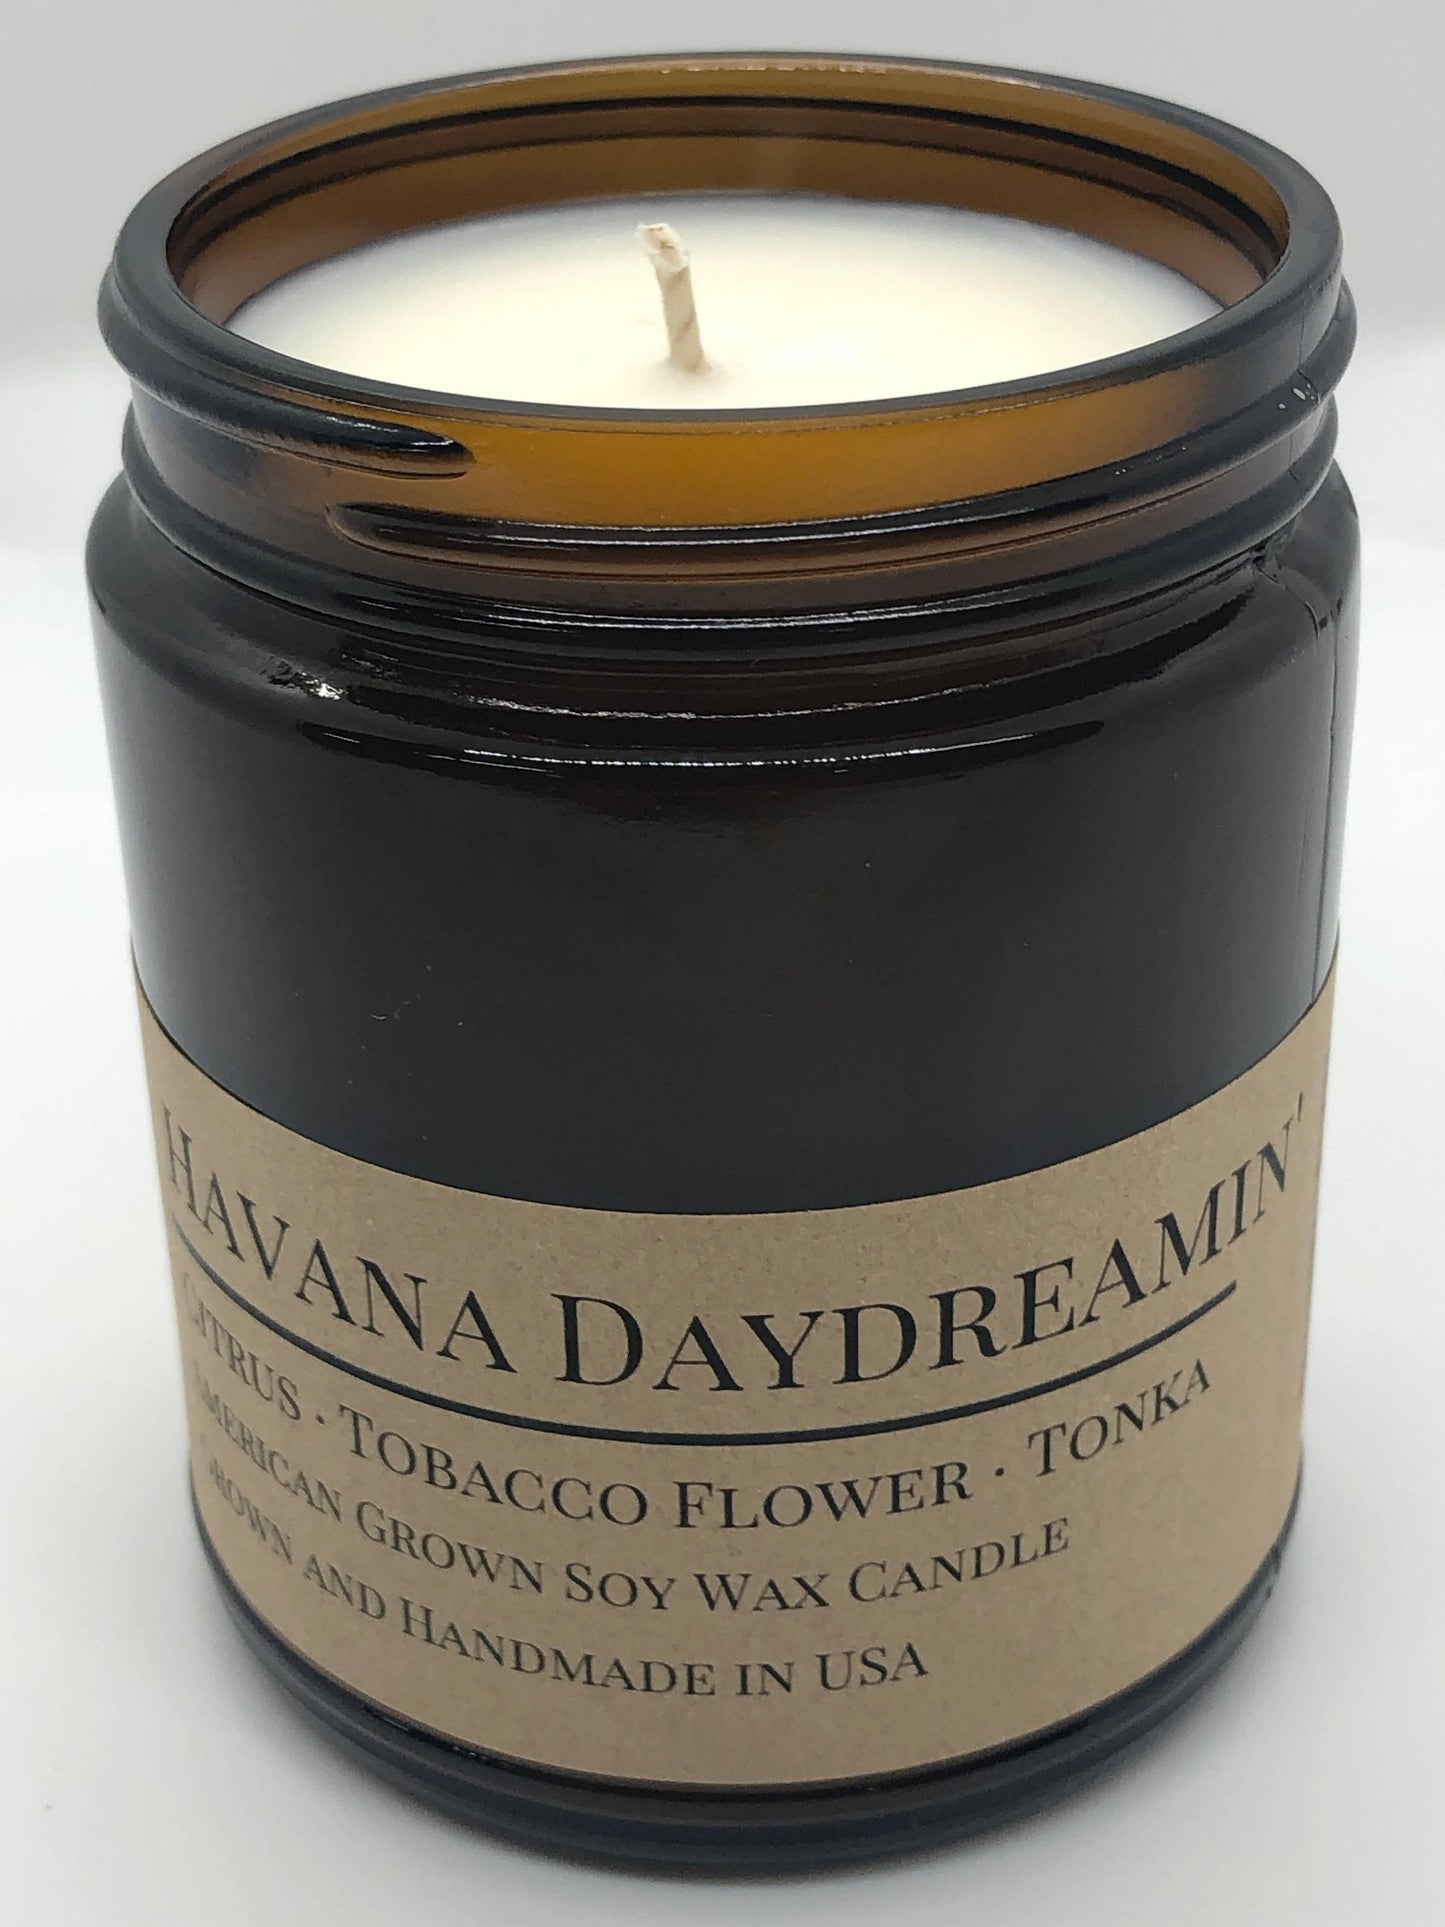 havana daydreamin' soy wax candle | 9 oz amber apothecary jar by prairie fire tallow, candles, and lavender